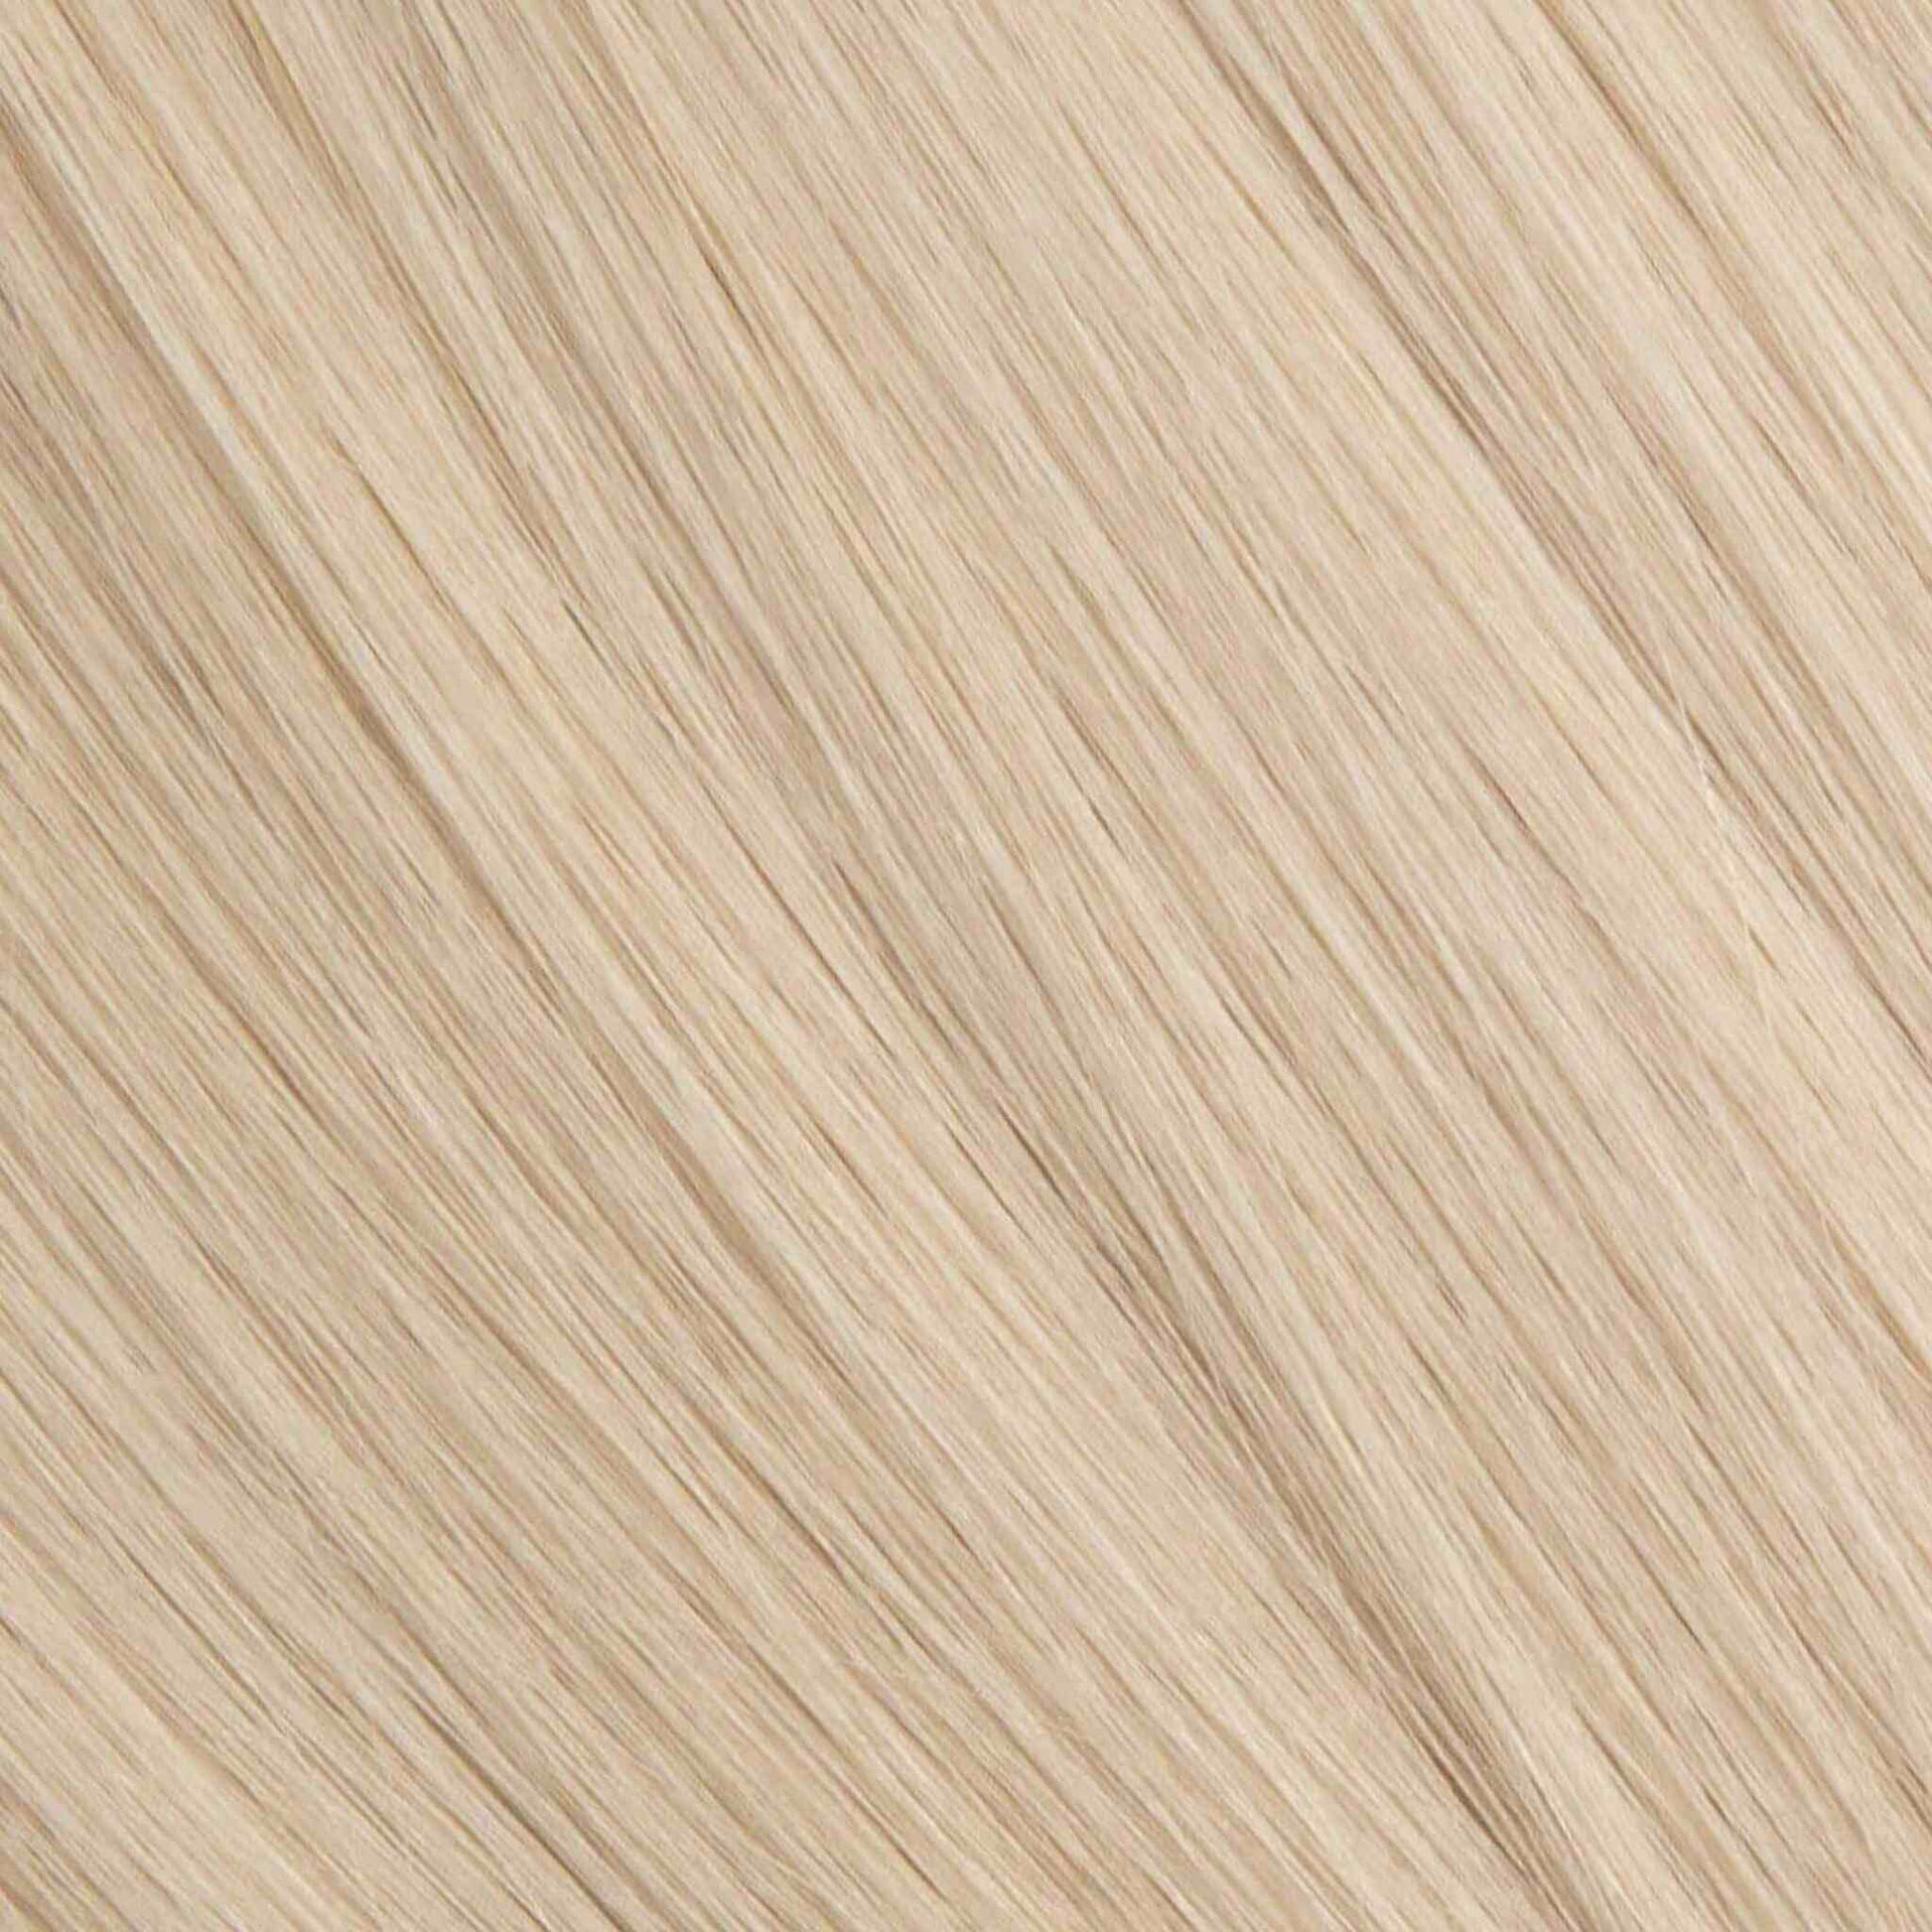 I-Tip 16" 25g Professional Hair Extensions - Icy Silver Blonde #66